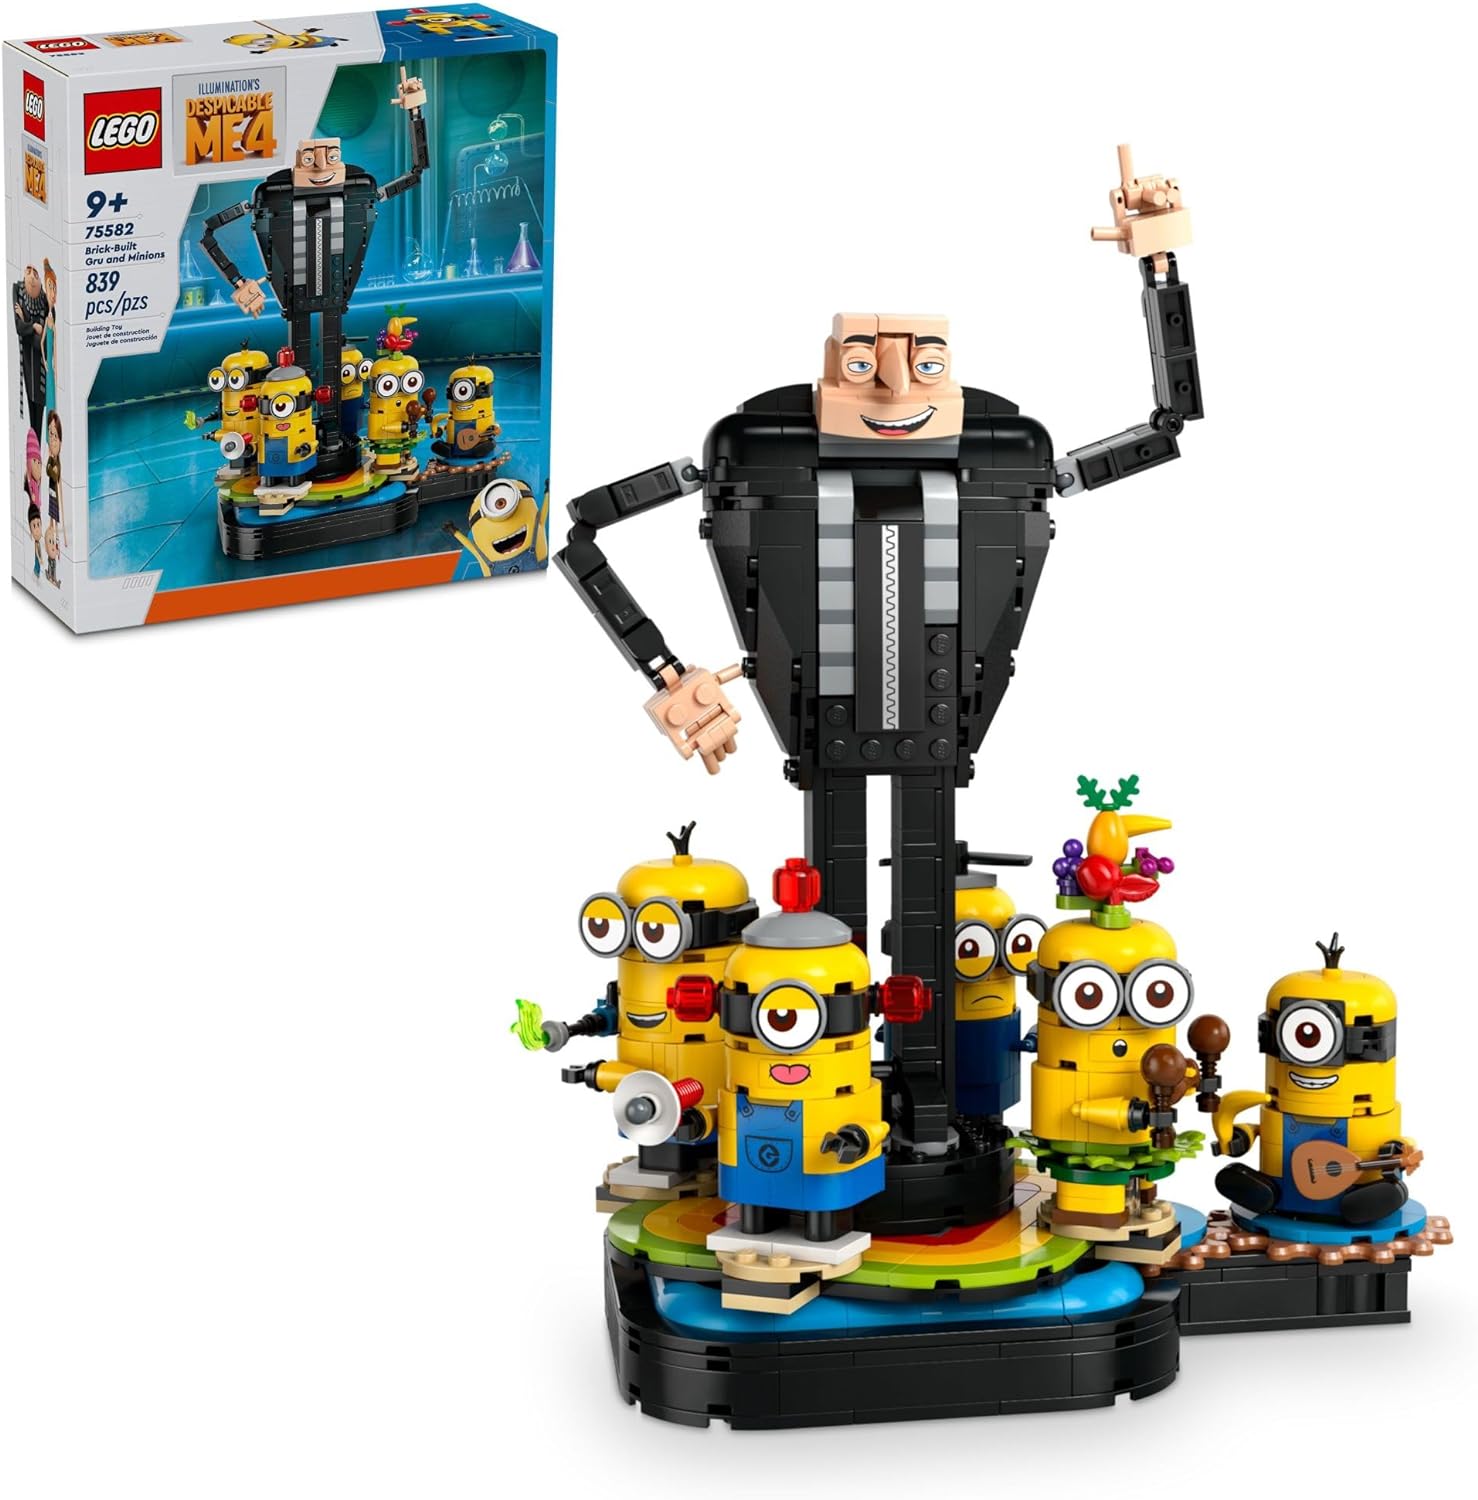 LEGO Despicable Me 4 Brick_Built Gru and Minions Figure_ Buildable Minions Toy for Kids_ Dancing De